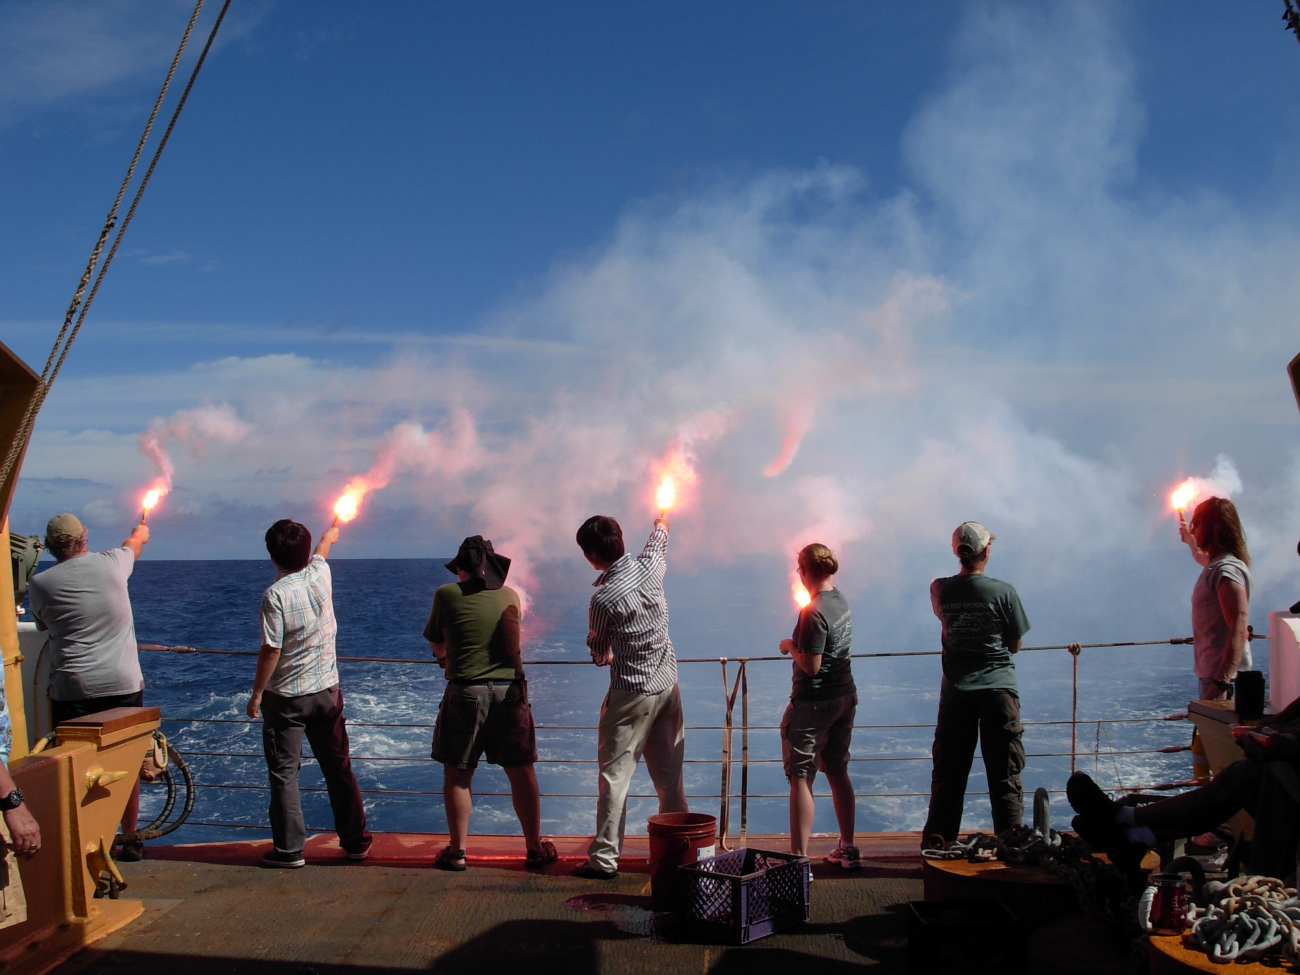 Flair drills to train personnel in igniting flairs in case of emergency on theNOAA Ship KA'IMIMOANA (R333)